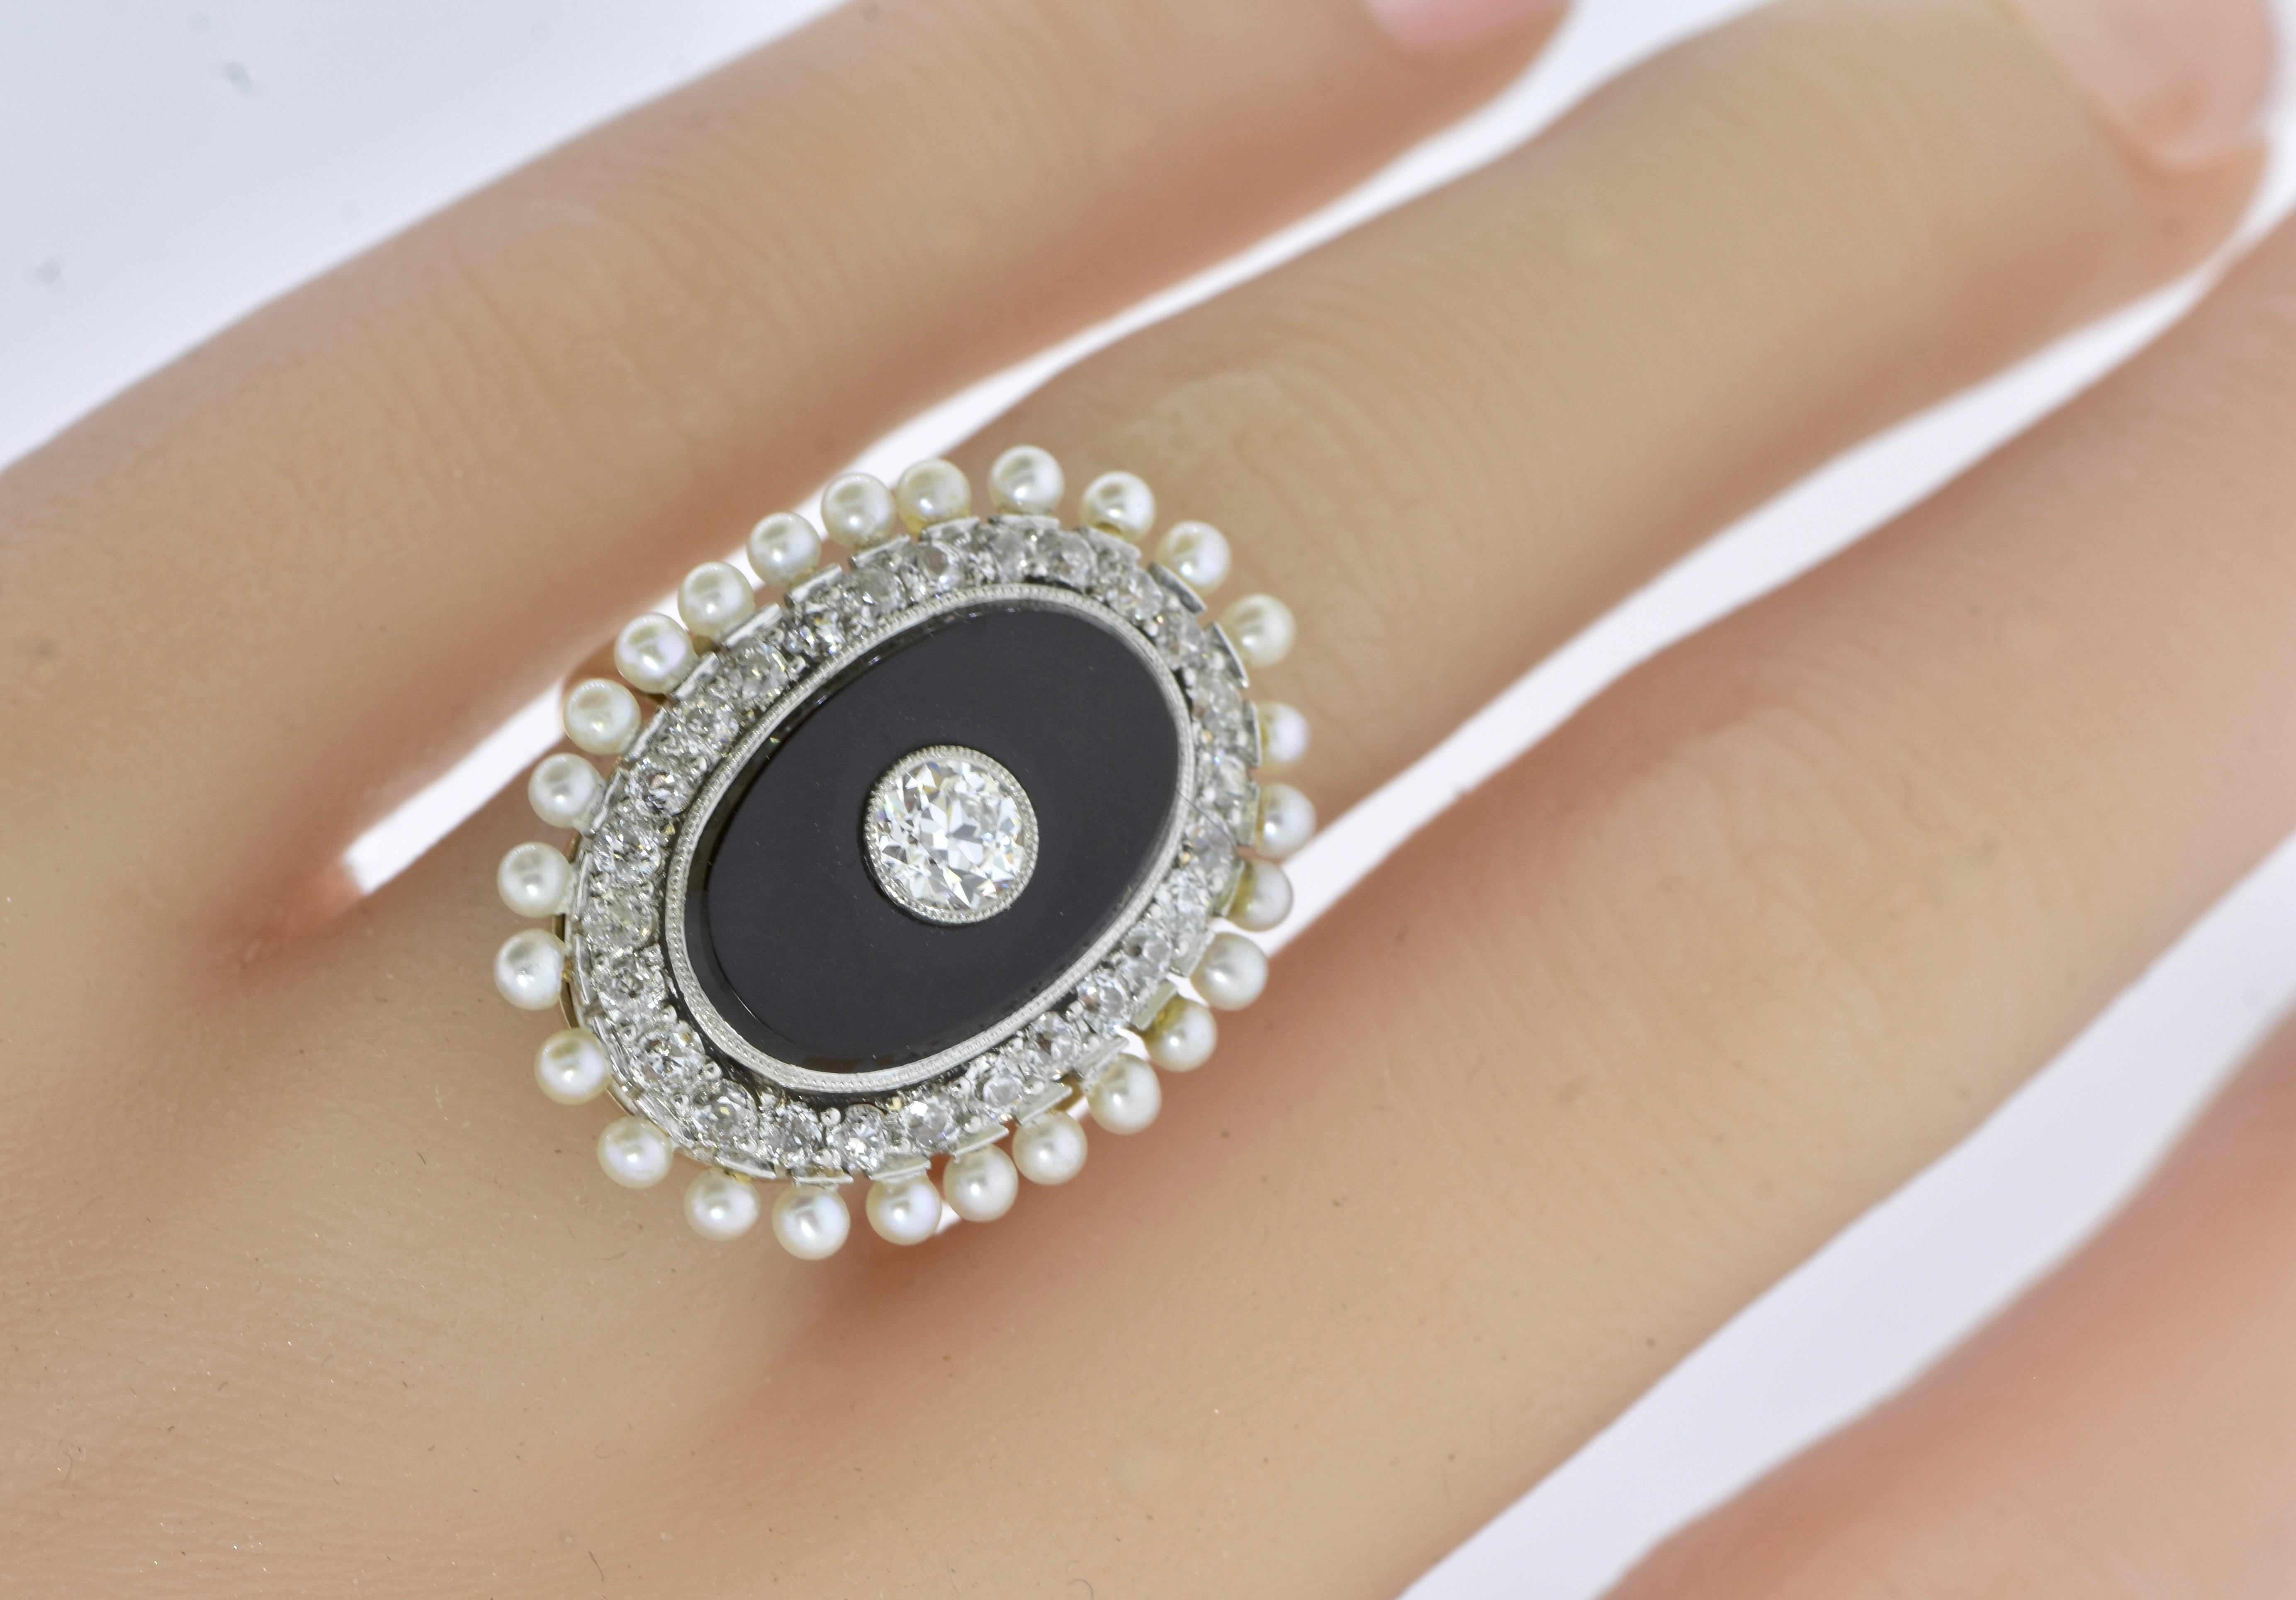 Antique onyx, diamond and natural oriental salt-water pearl ring, circa 1900.  This is an appealing and unusual design that skillfully marries white. natural pearls, diamonds and onyx in a very noticeable way.

The center of the ring consists of a